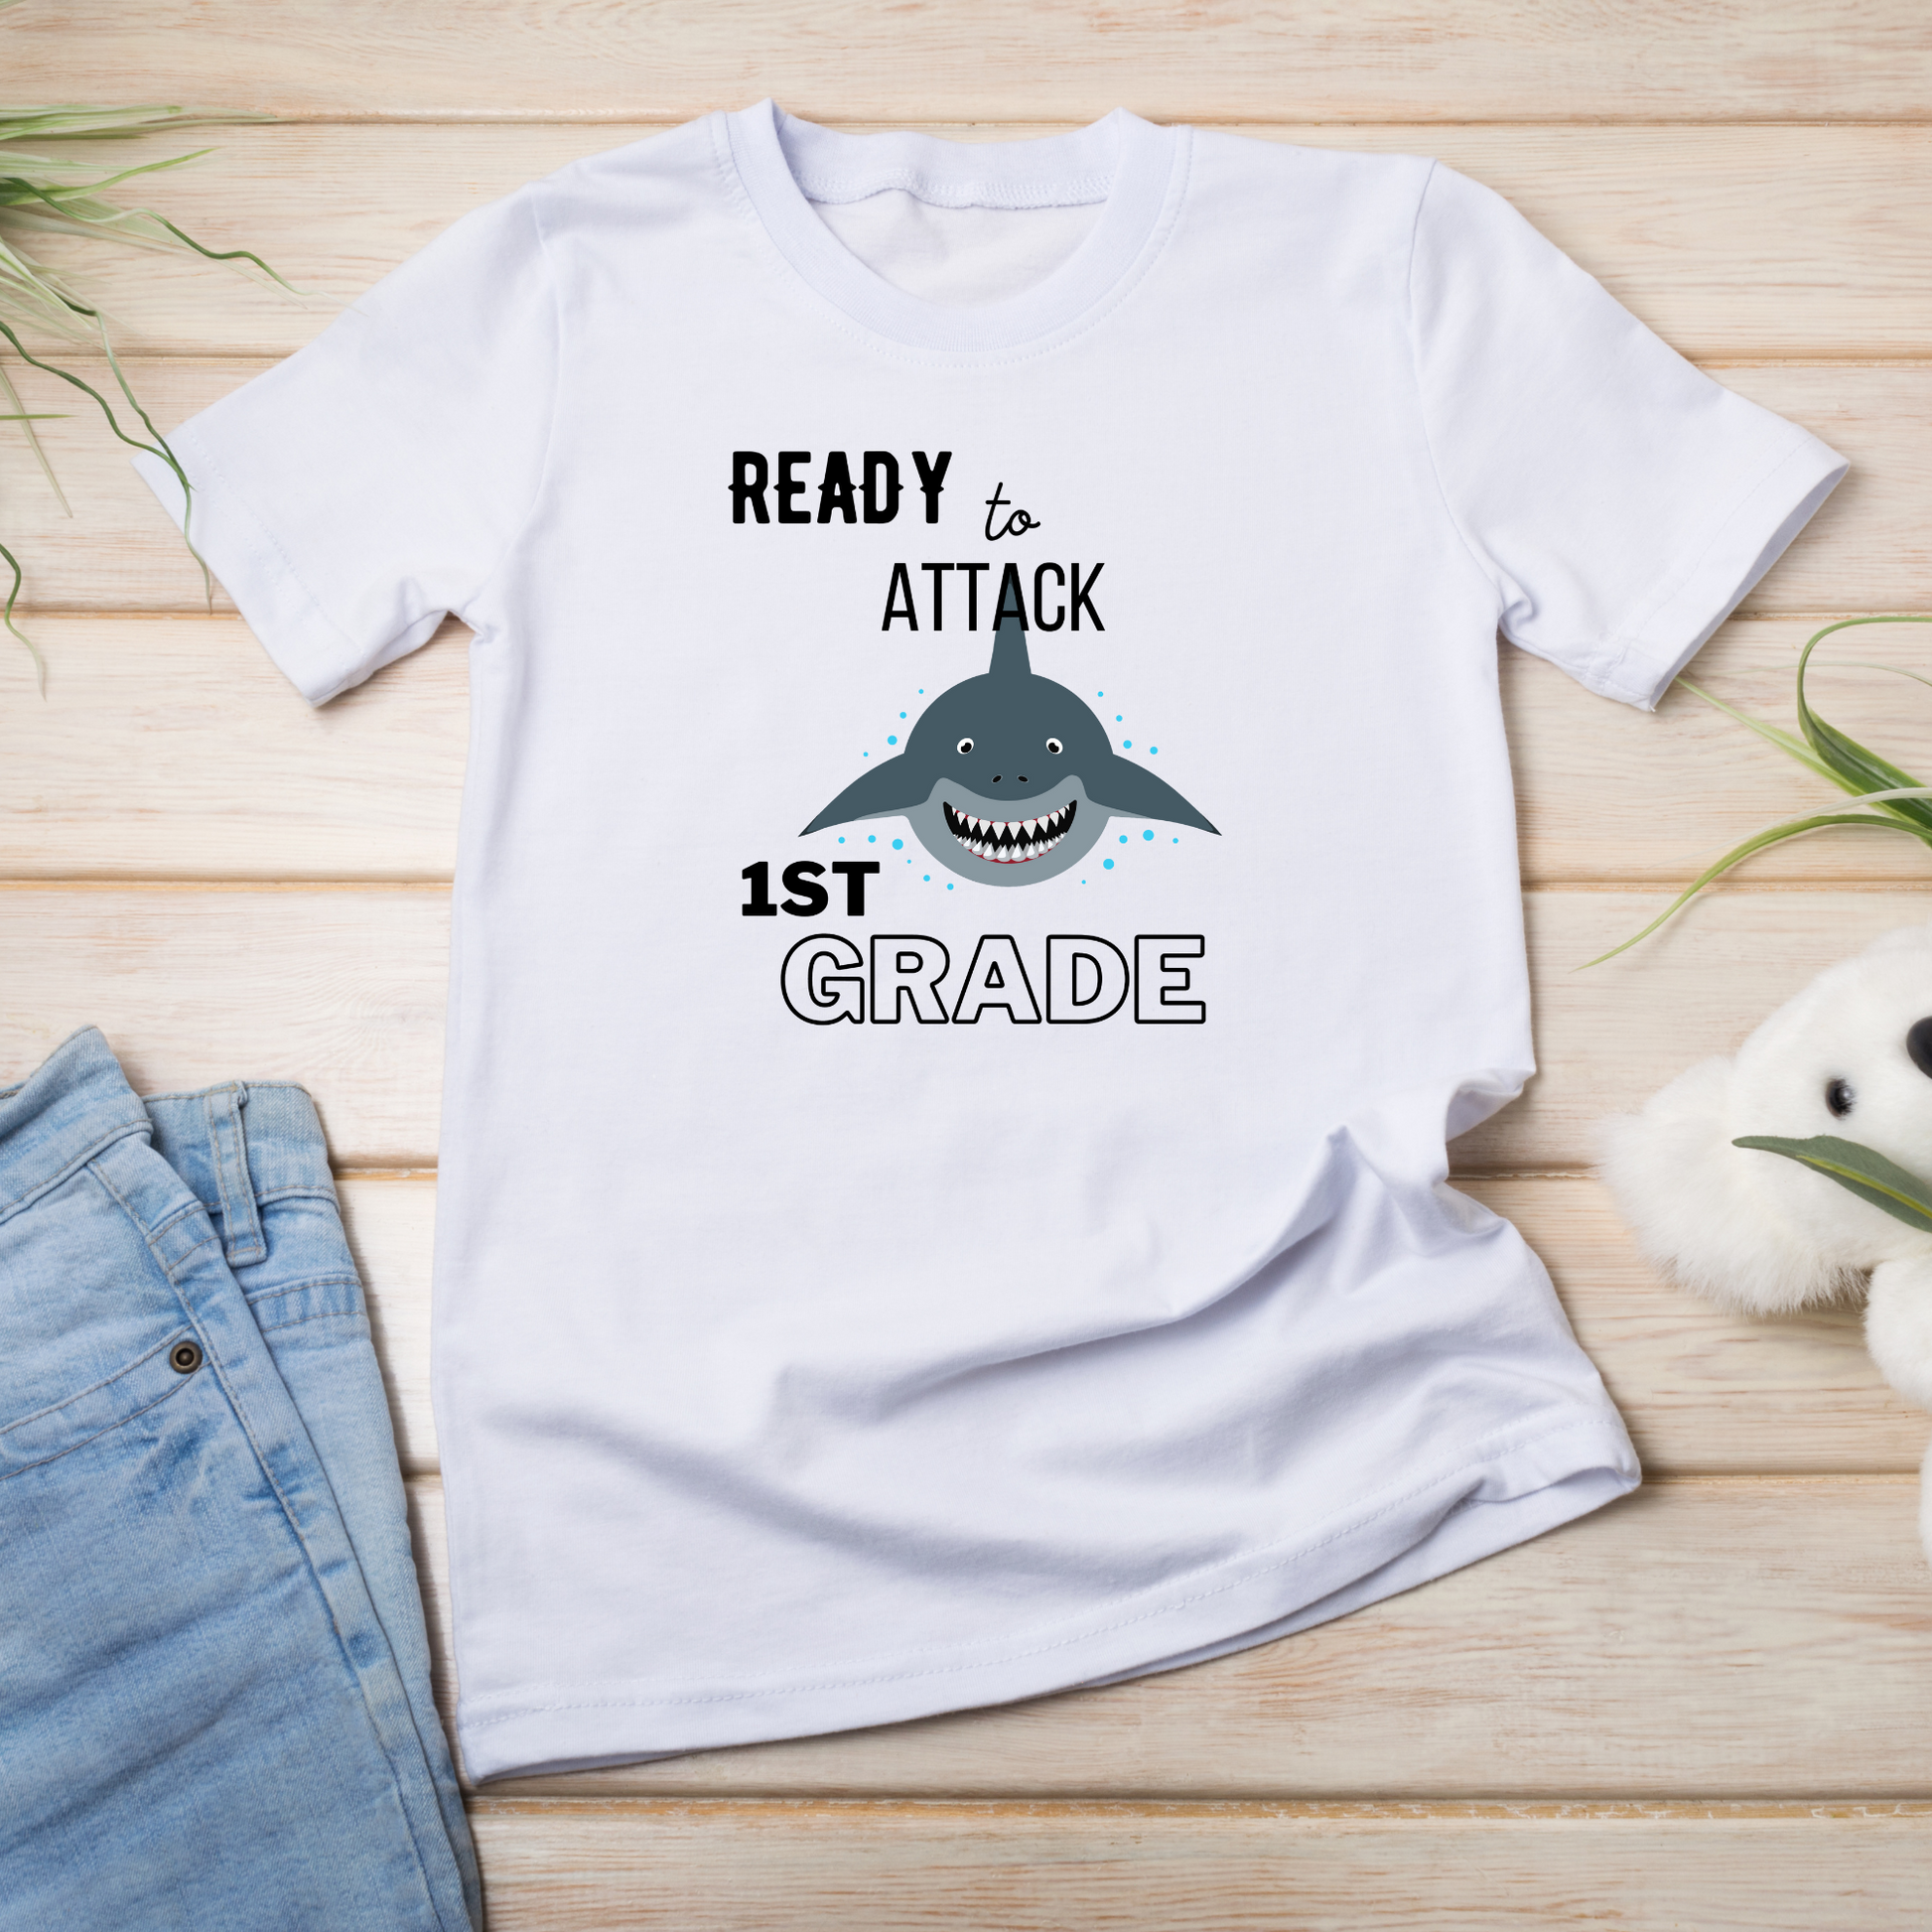 Ready to Attack 1st grade shirt for kids